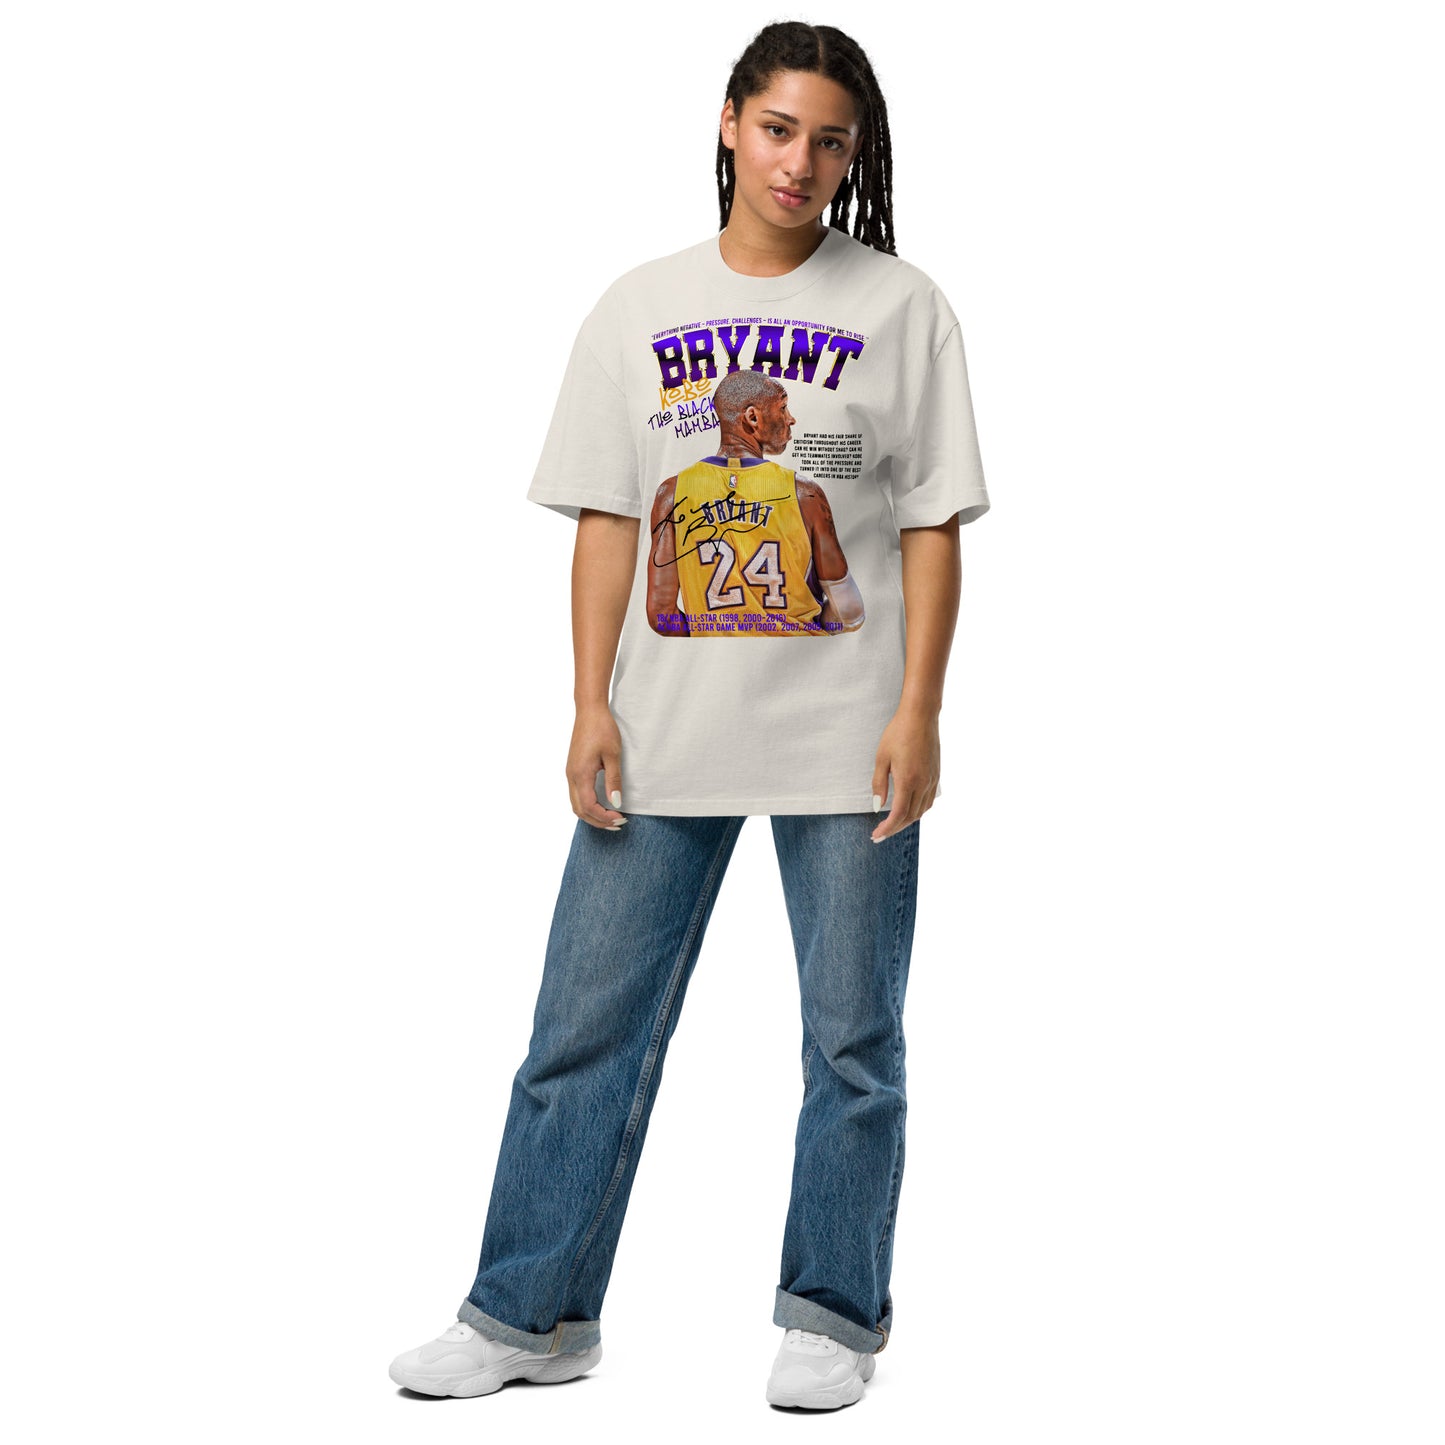 Bryant Oversized faded t-shirt